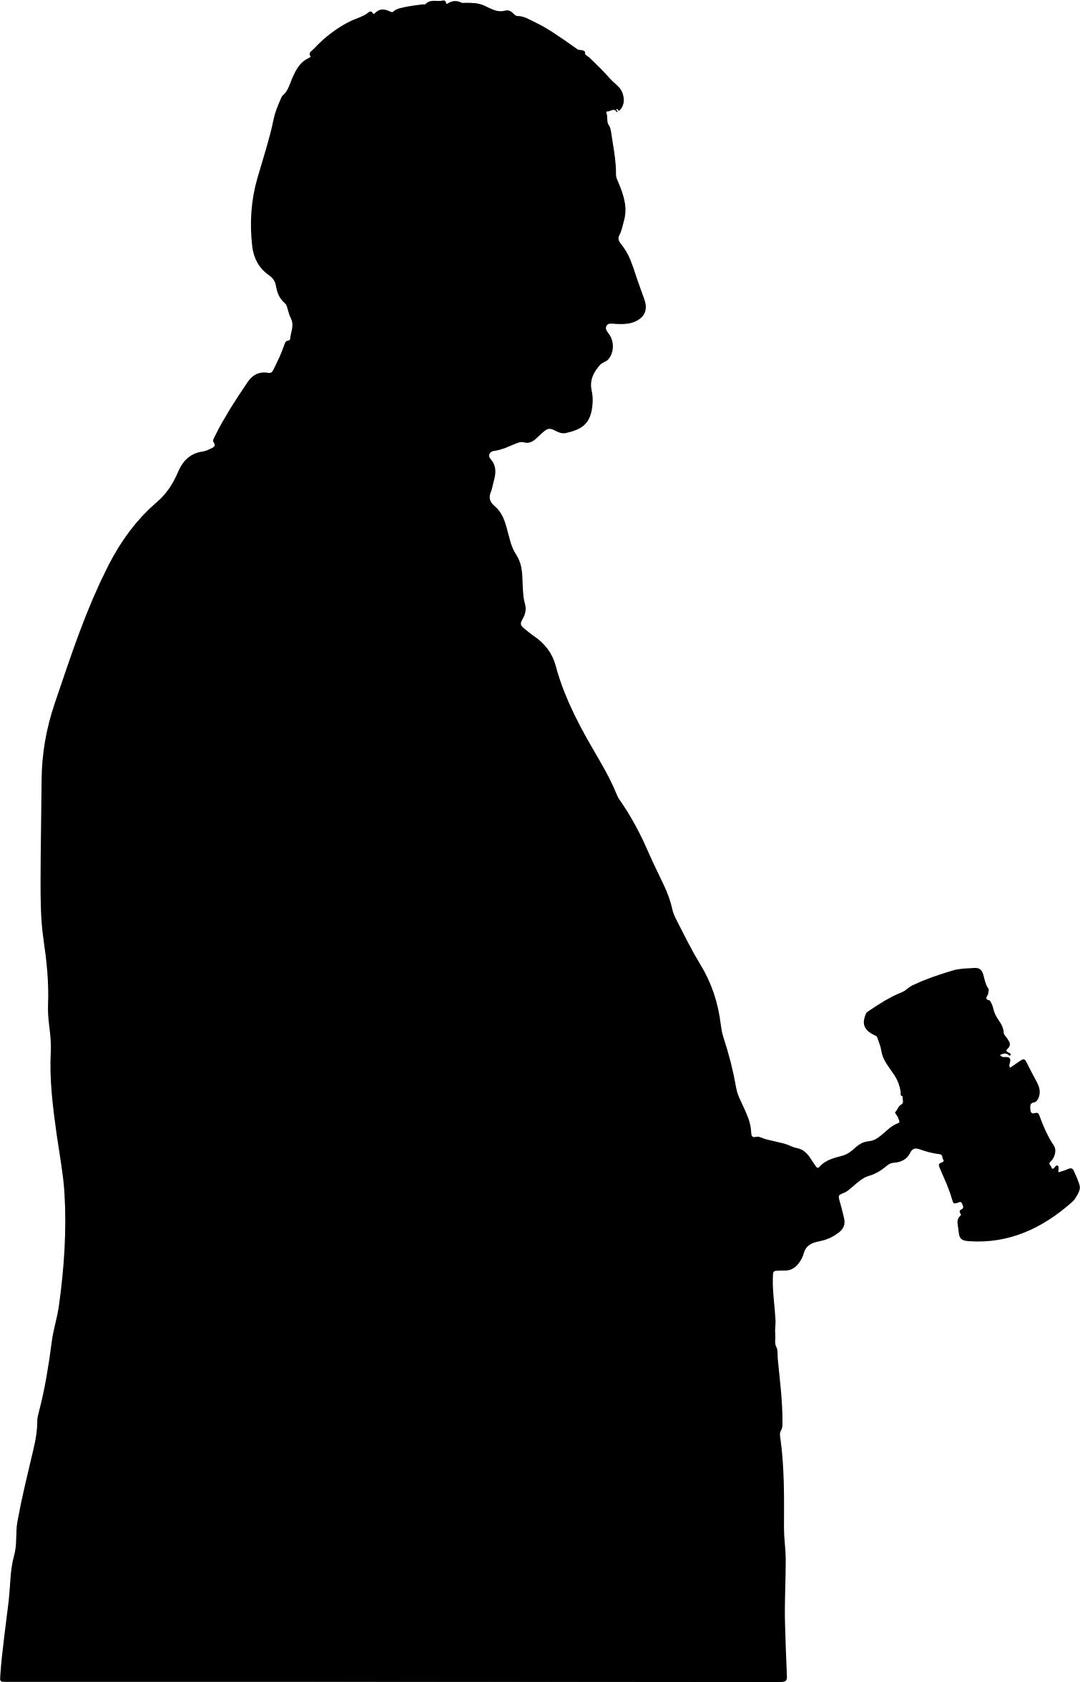 Judge With Gavel Silhouette png transparent